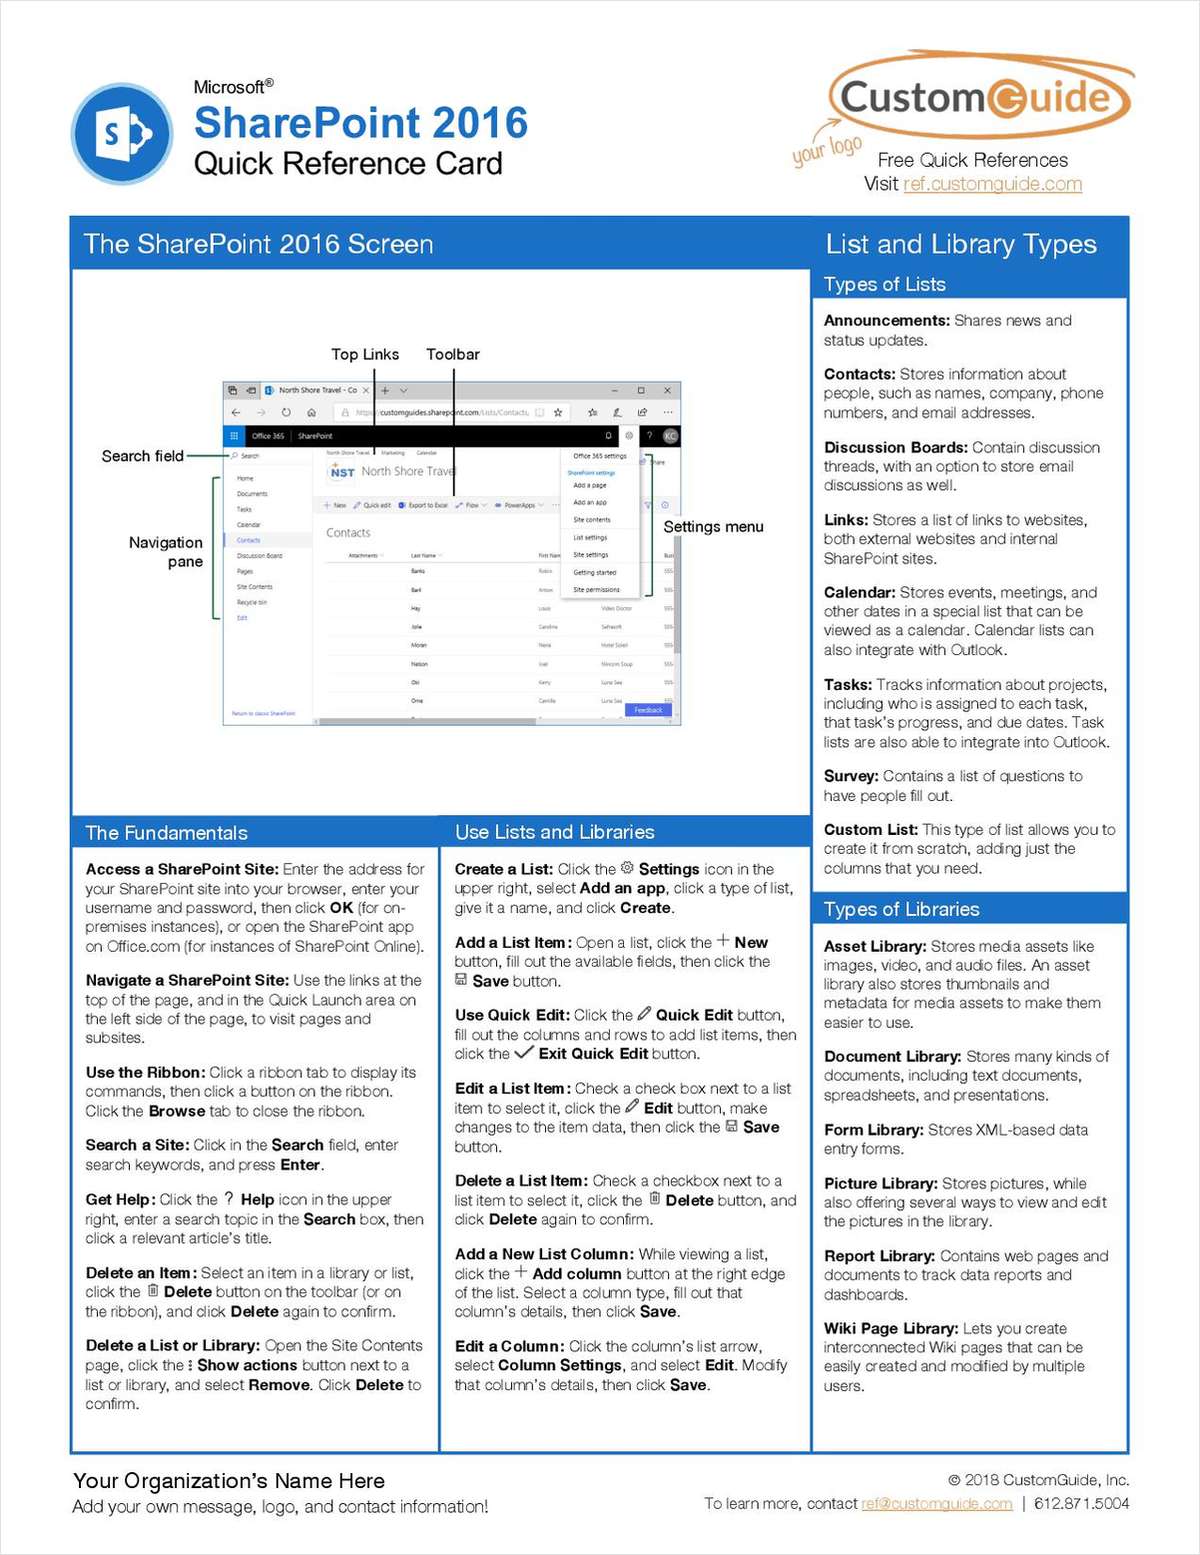 Microsoft Office SharePoint 2016 - Quick Reference Card